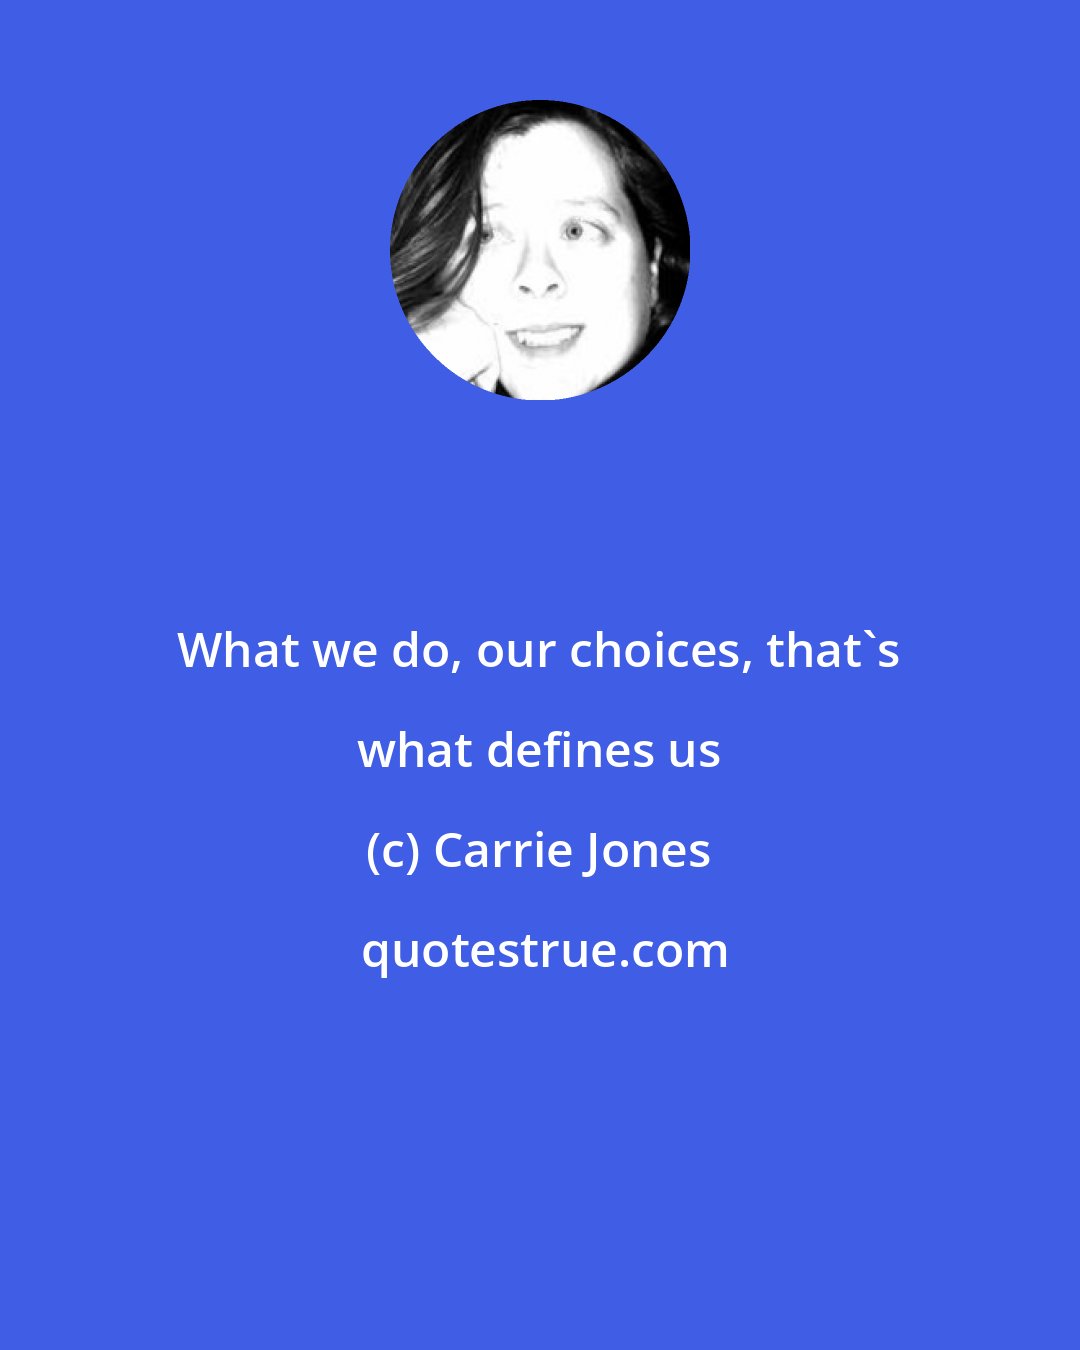 Carrie Jones: What we do, our choices, that's what defines us